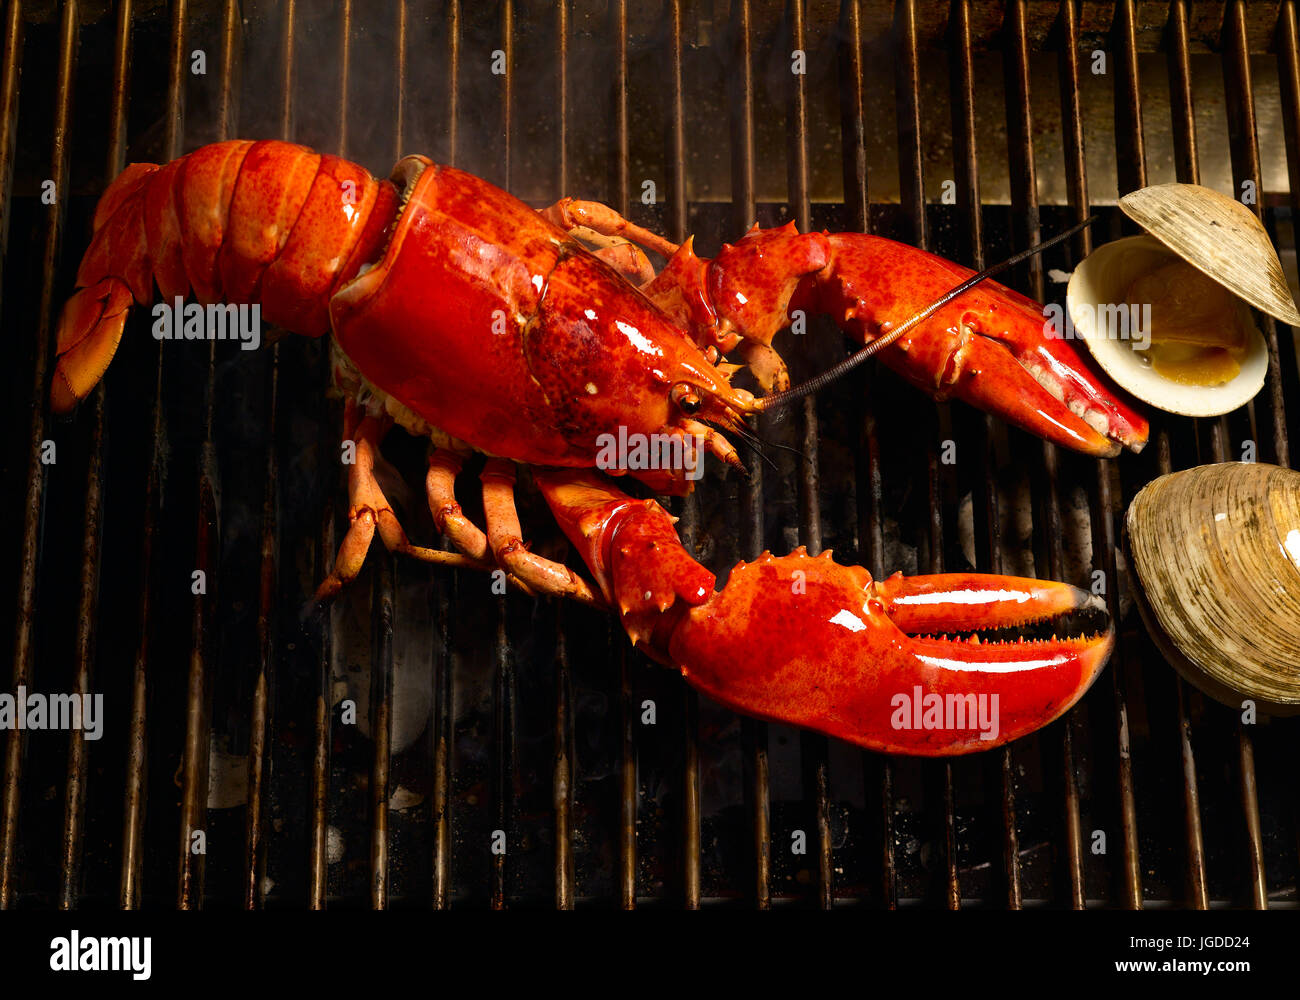 Lobster and clam bake Stock Photo